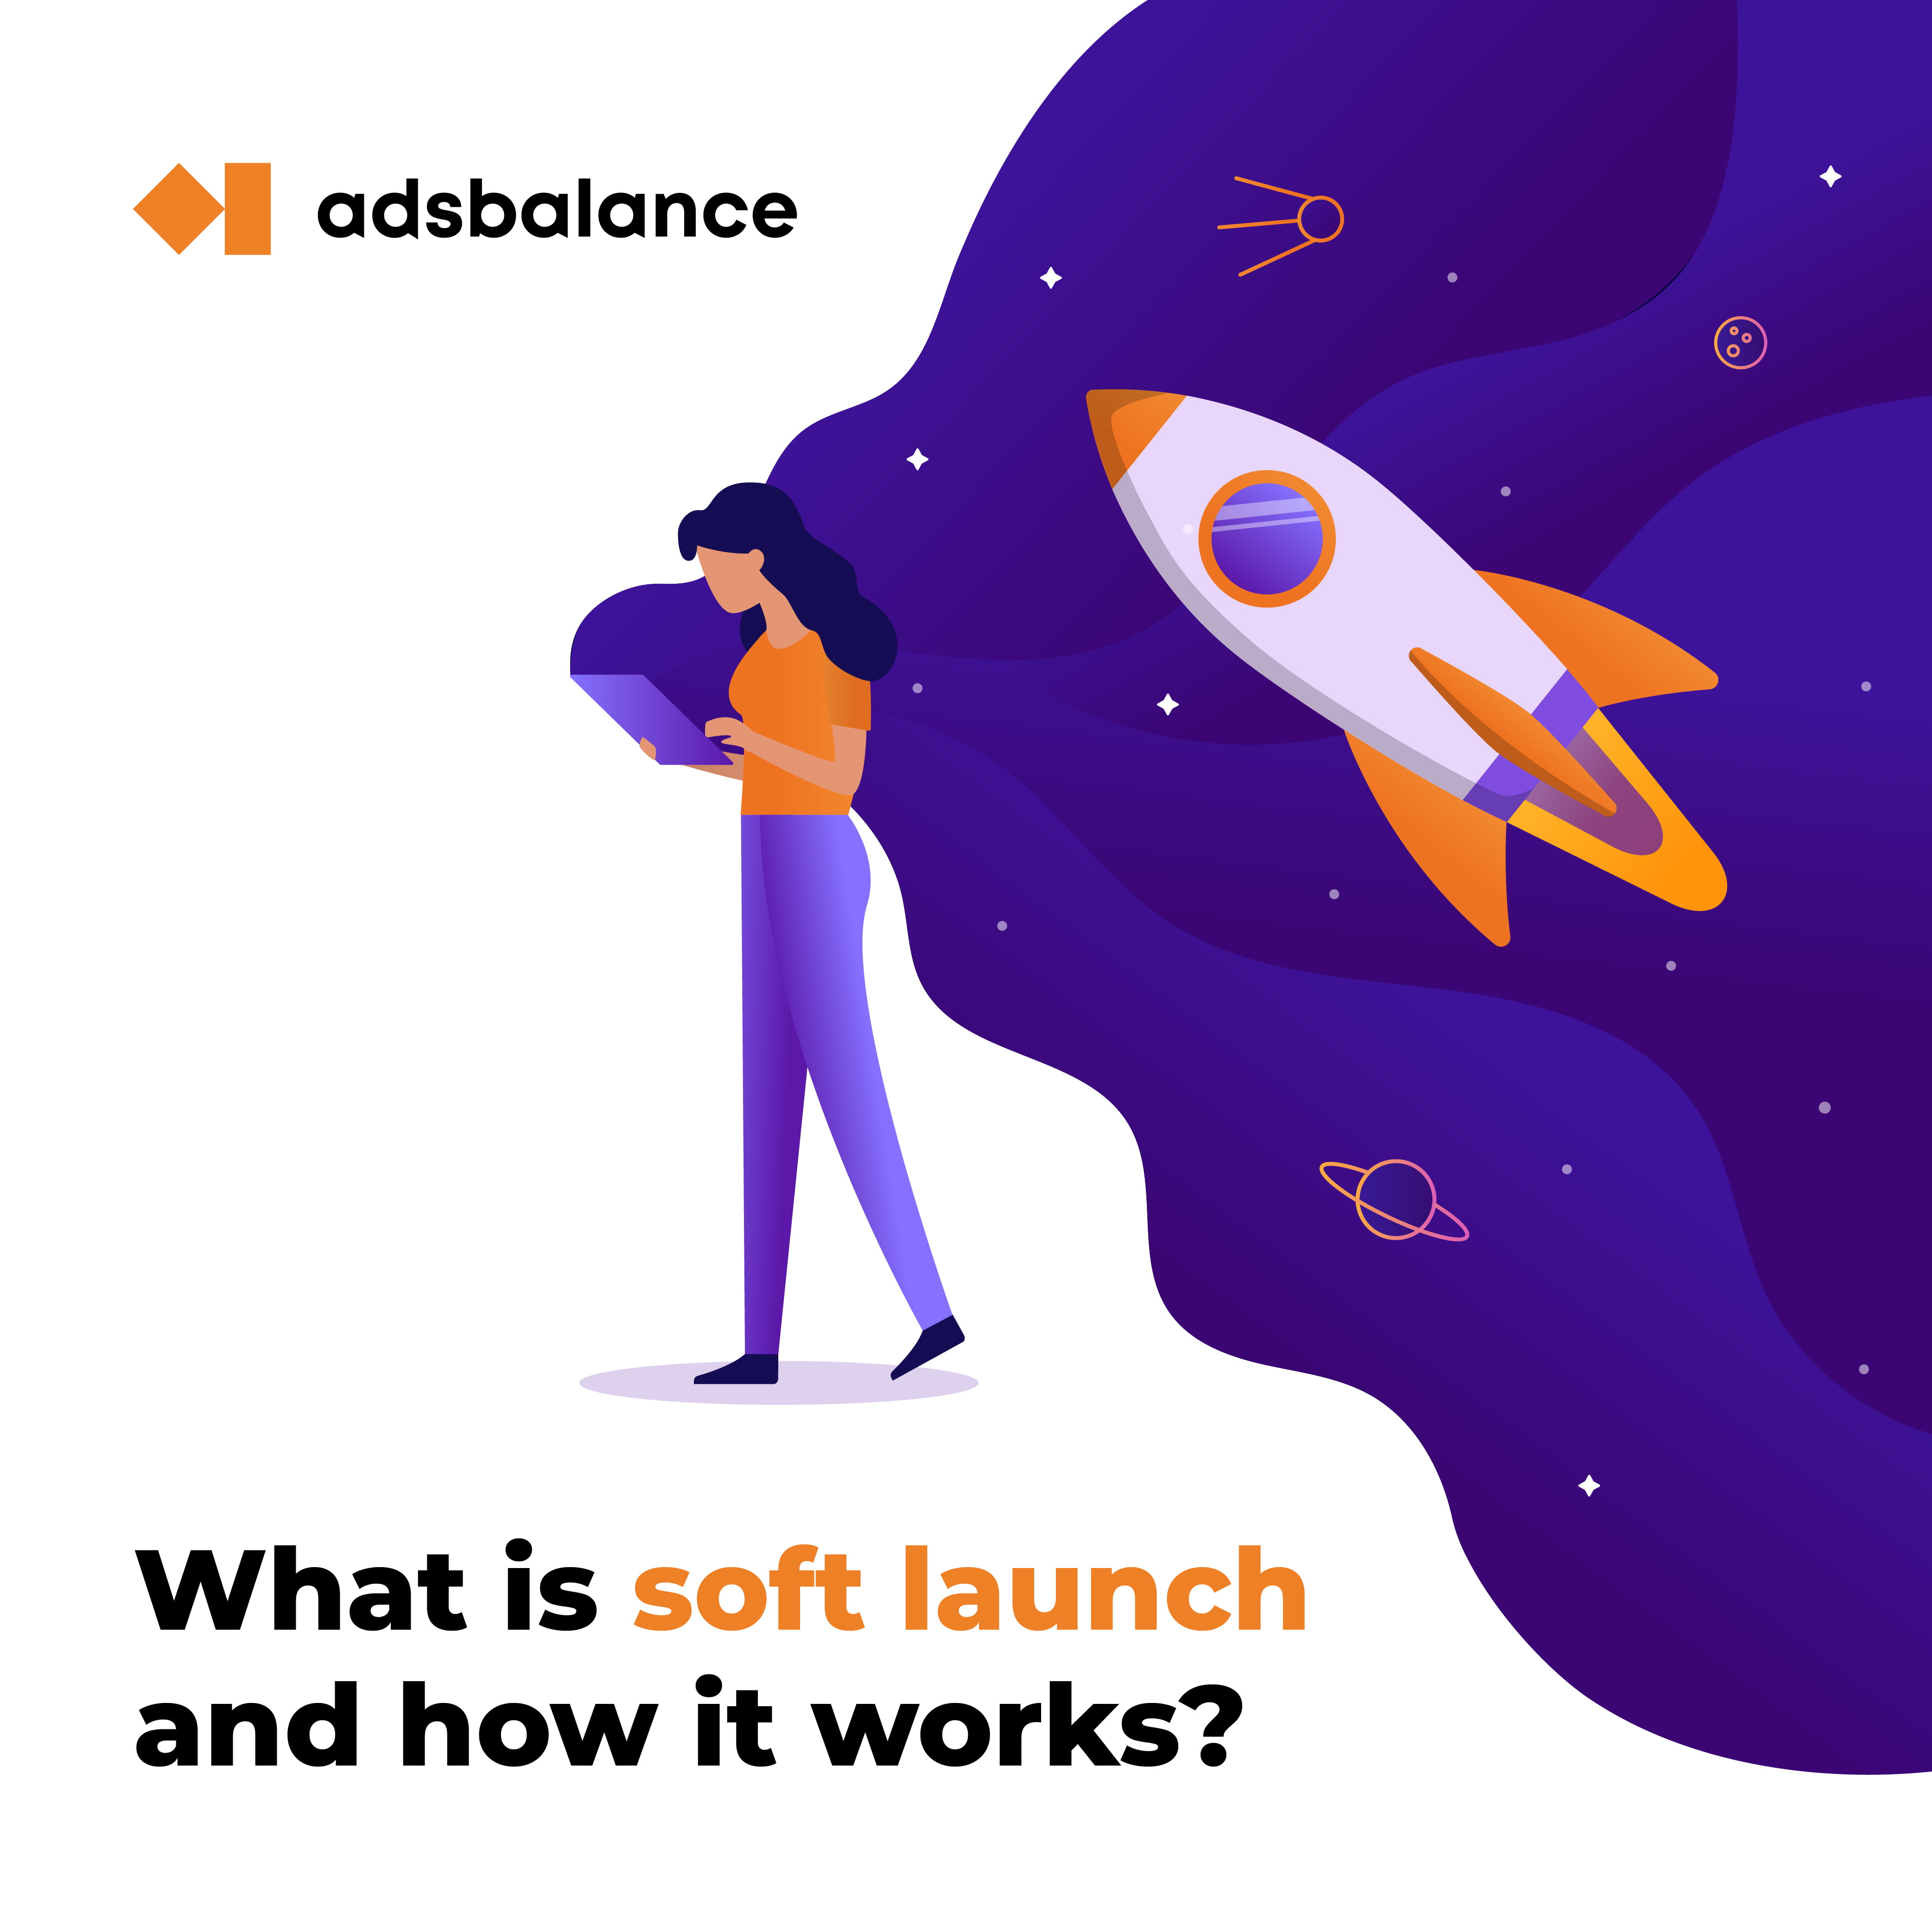 What is soft launch and why do you need it?